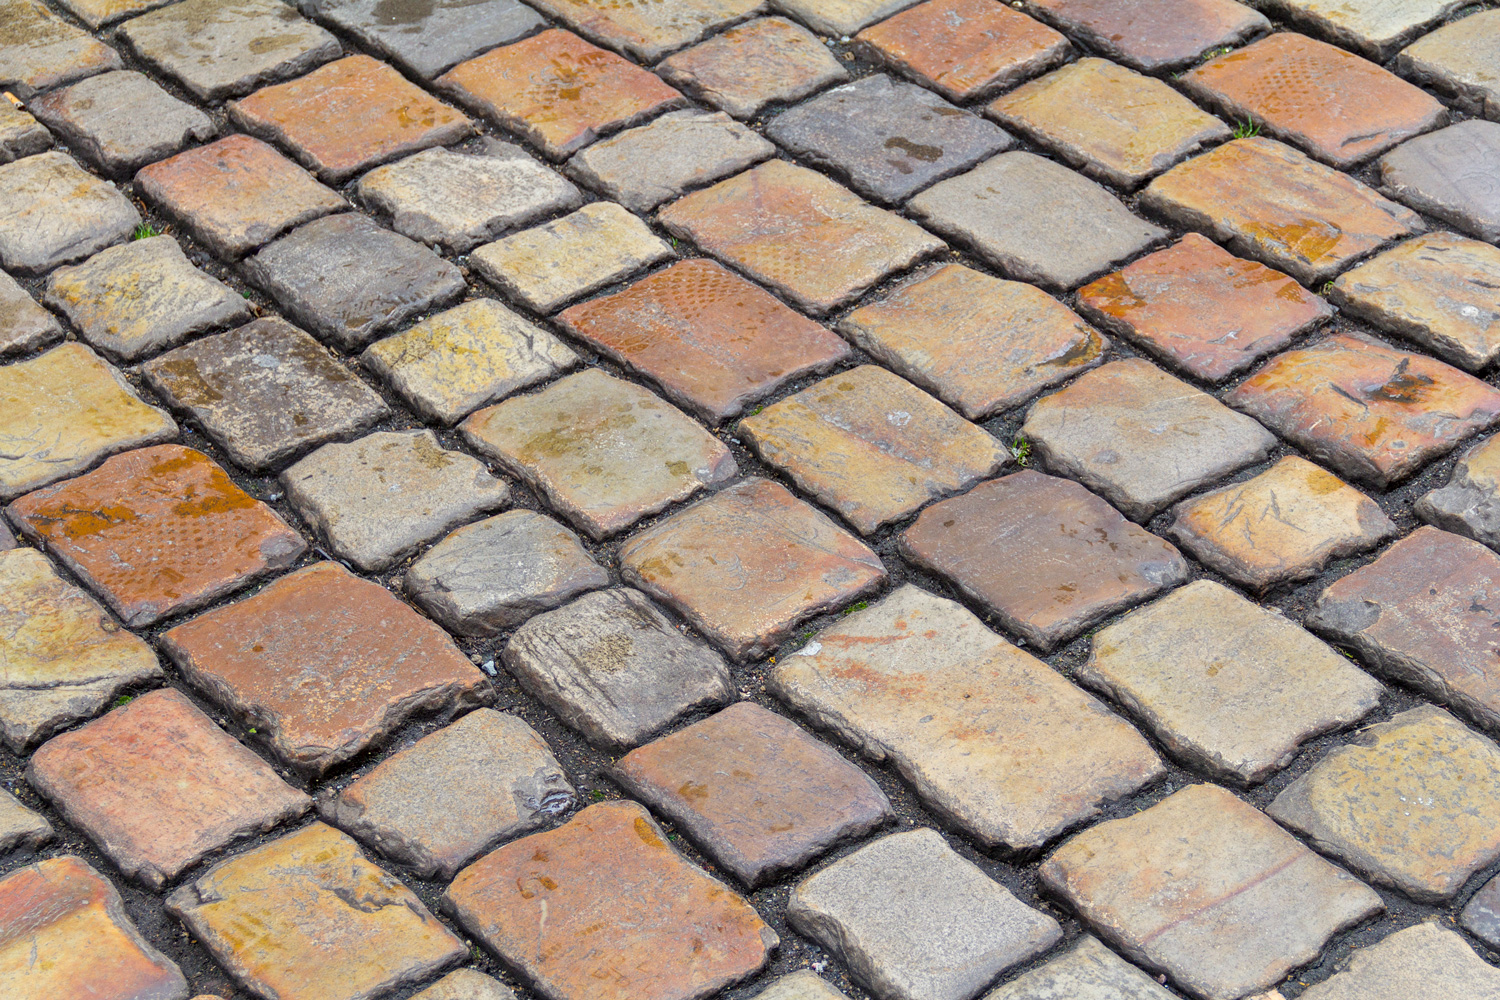 full frame shot showing the detail of a multicolored historic cobblestone pavement